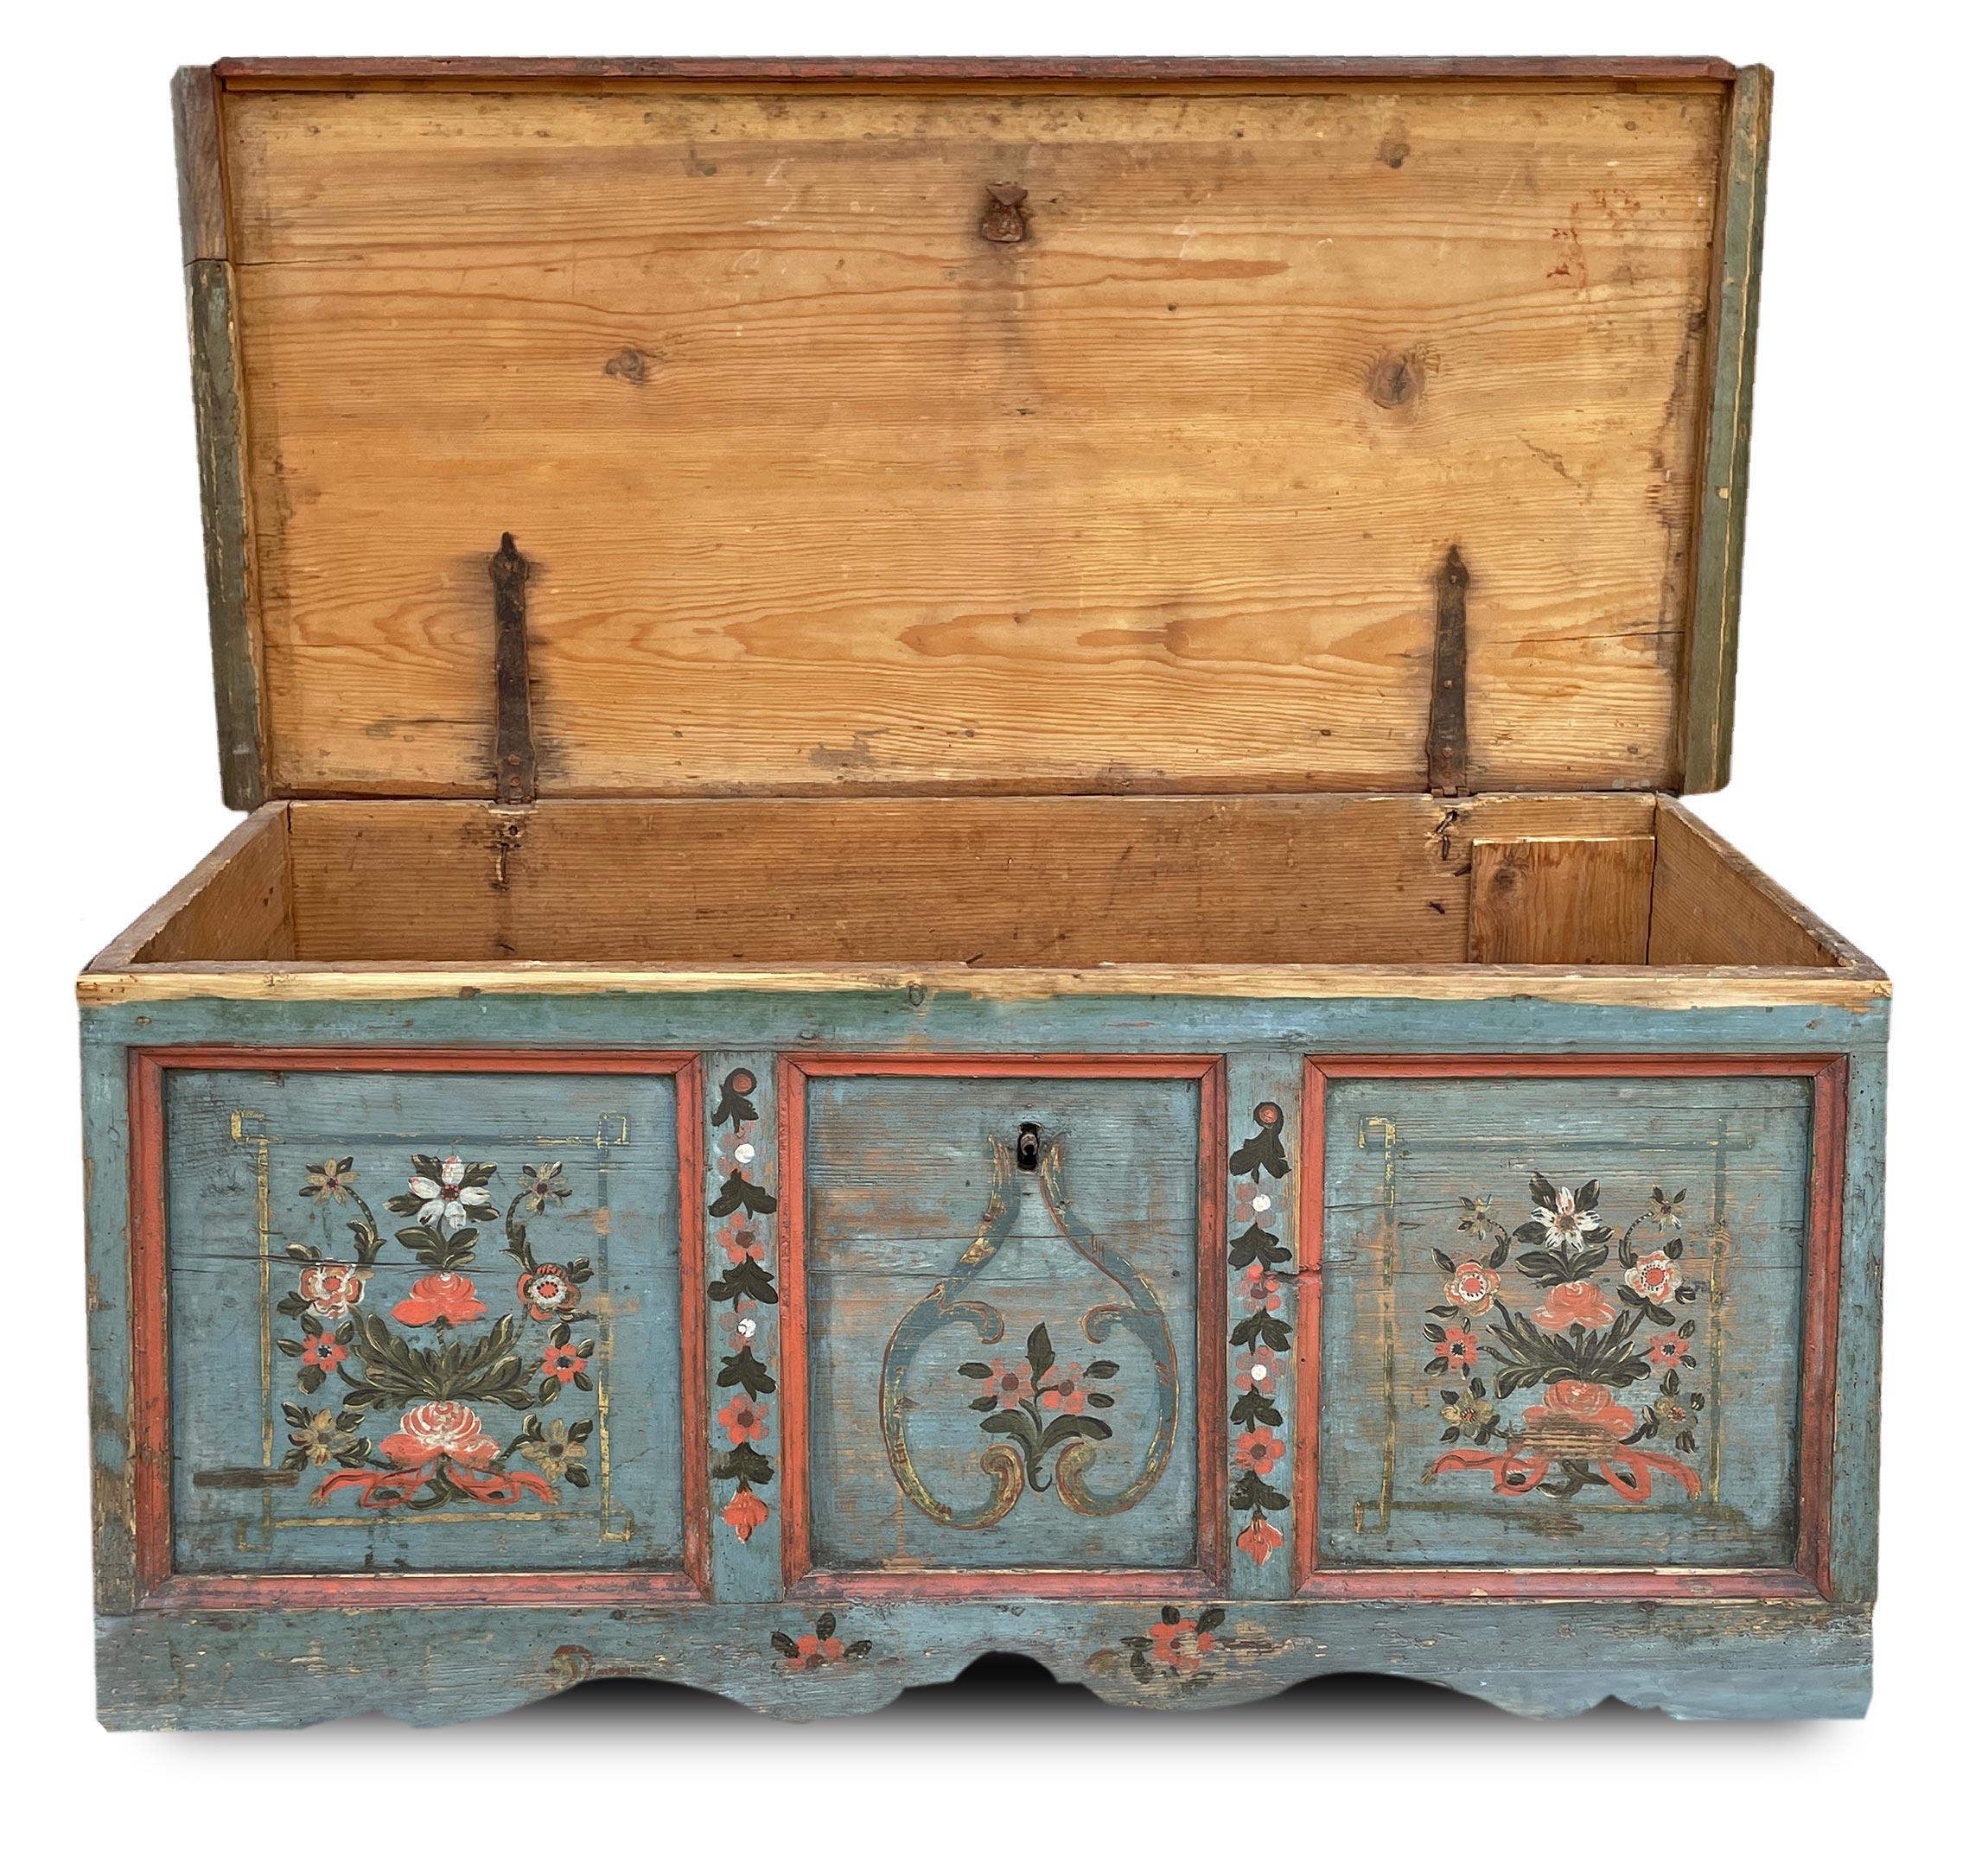 Fir Early 19th Century Blue Floral Panted Blanket Chest For Sale